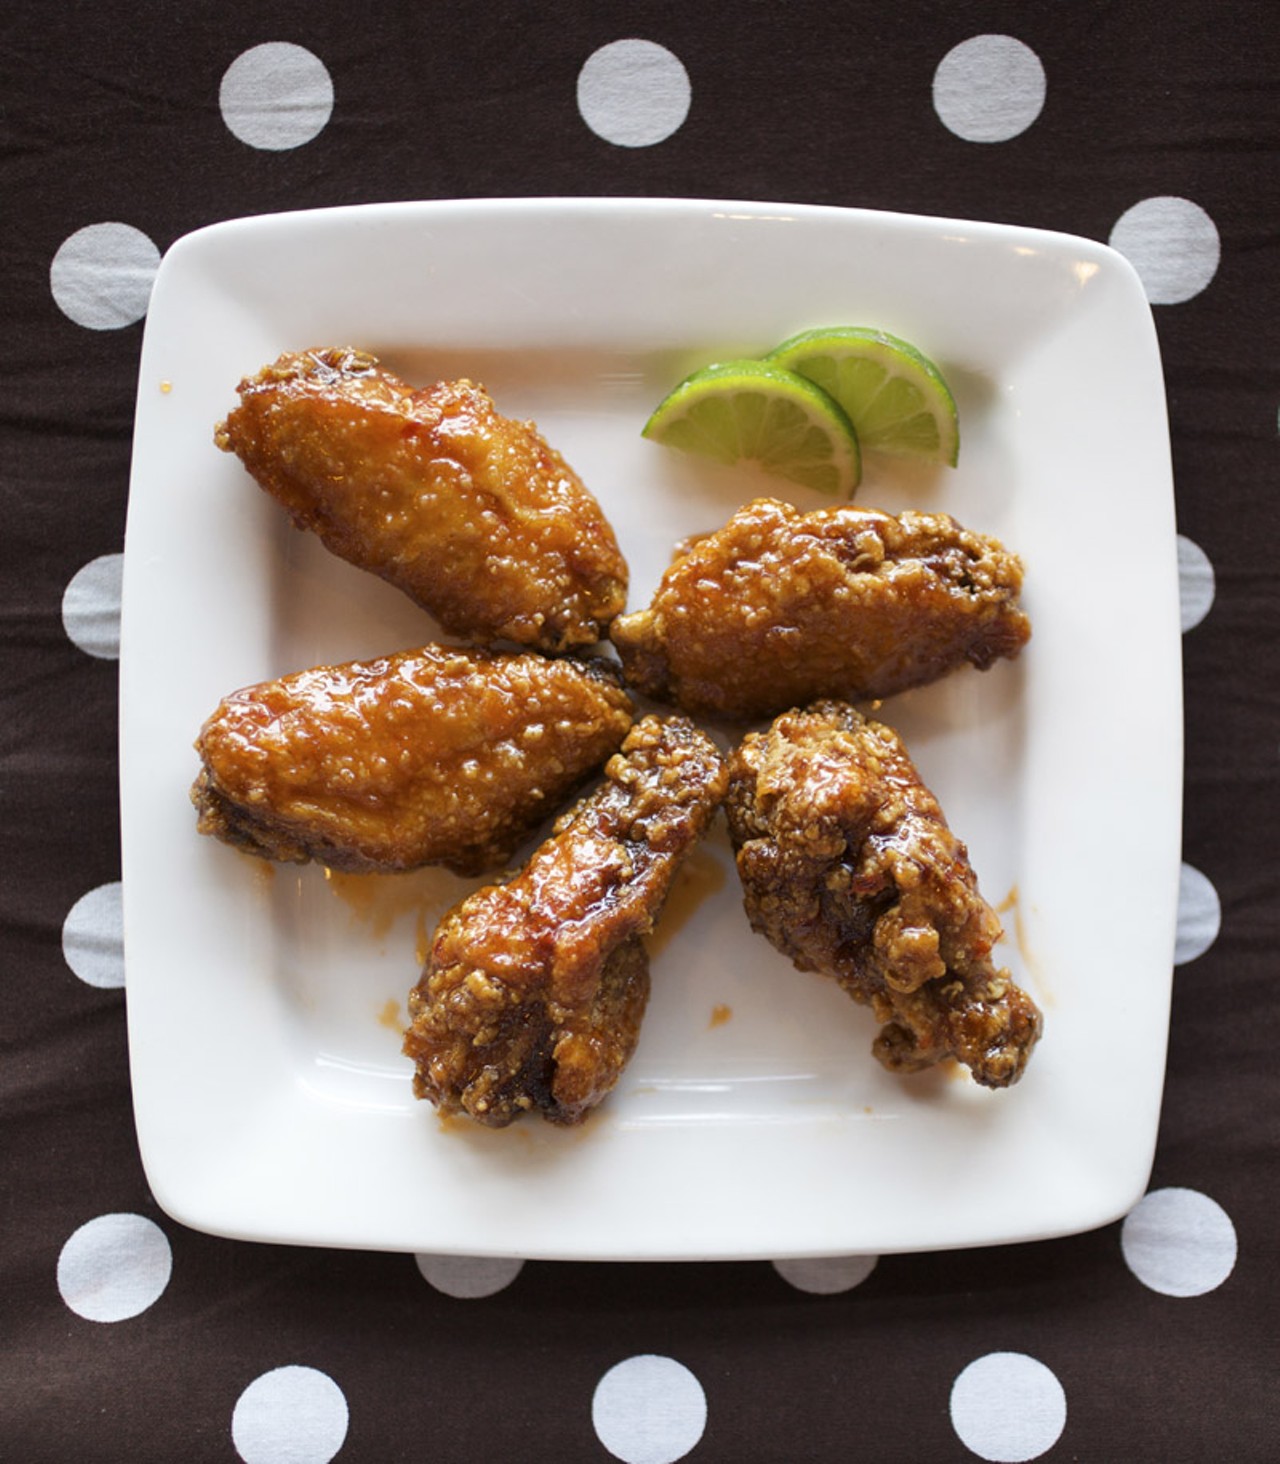 Wings with the Thai Chile-Lime sauce, which is a southwest Asian inspired sauce combining lime, cilantro and a slow building heat.